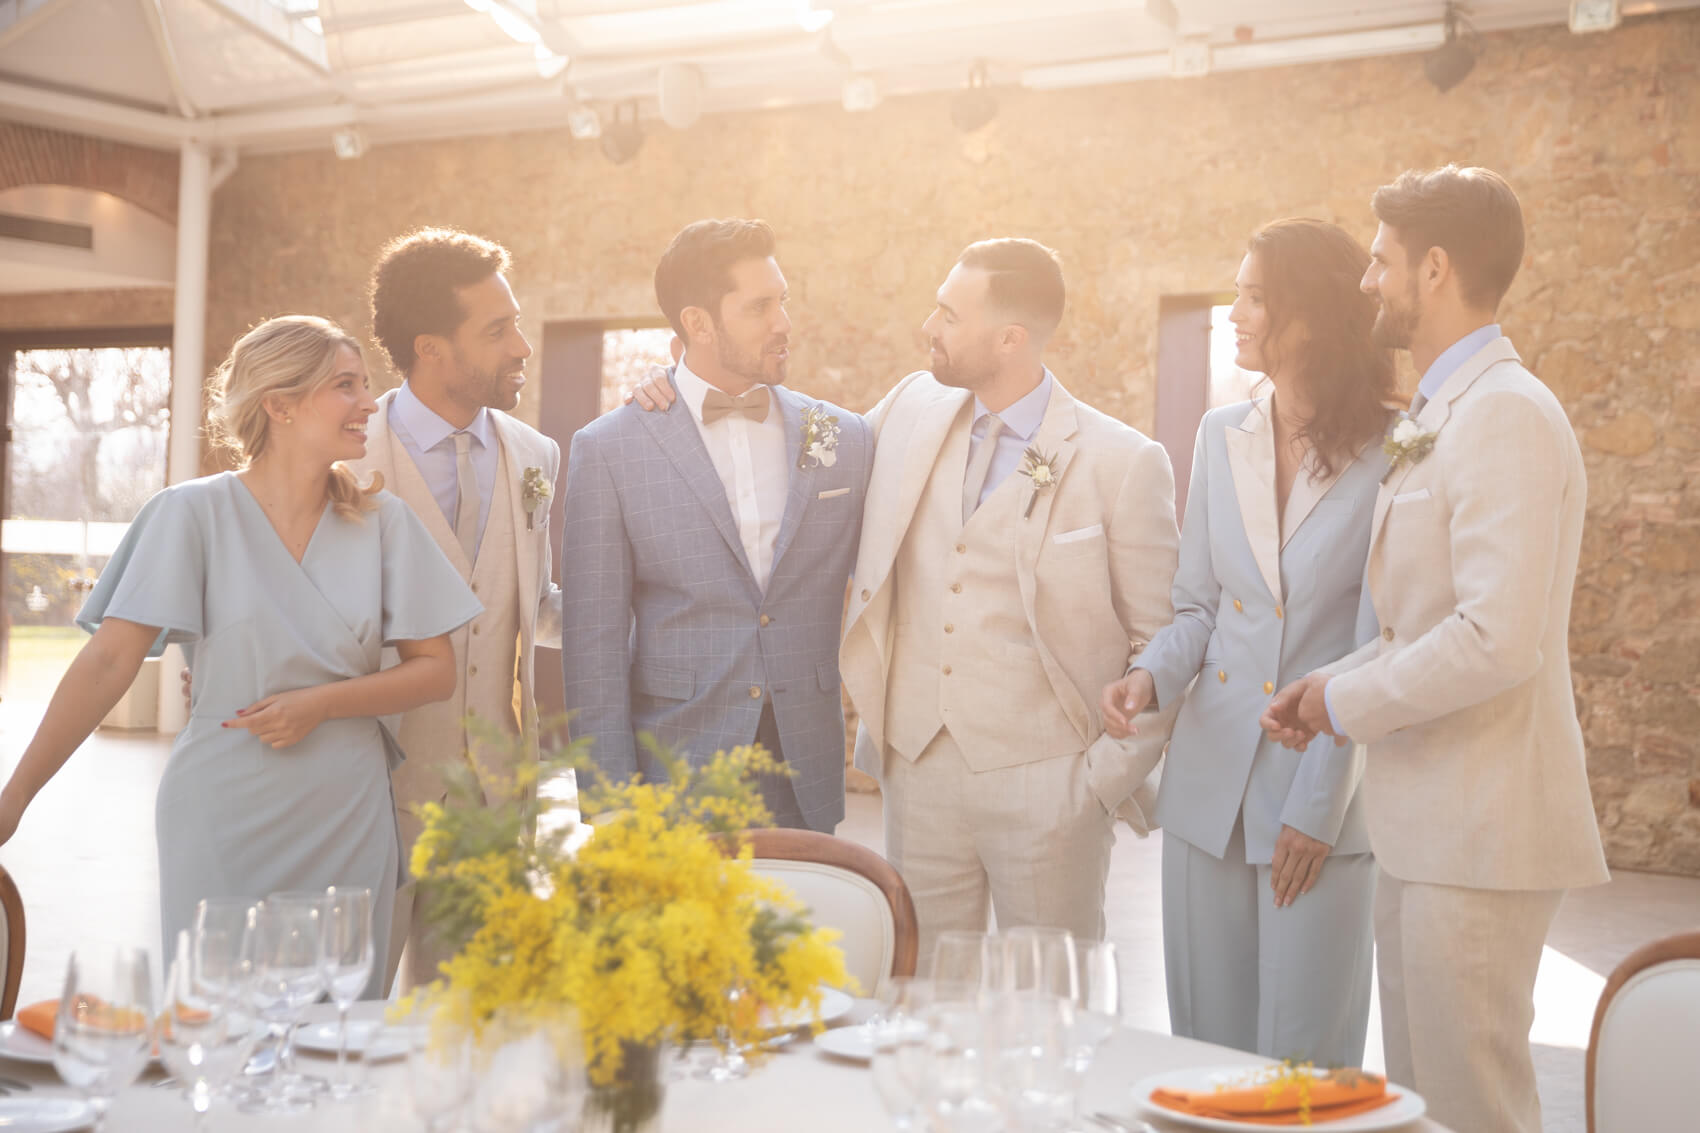 Beige Wedding Suits: The Perfect Choice for a Summer Wedding